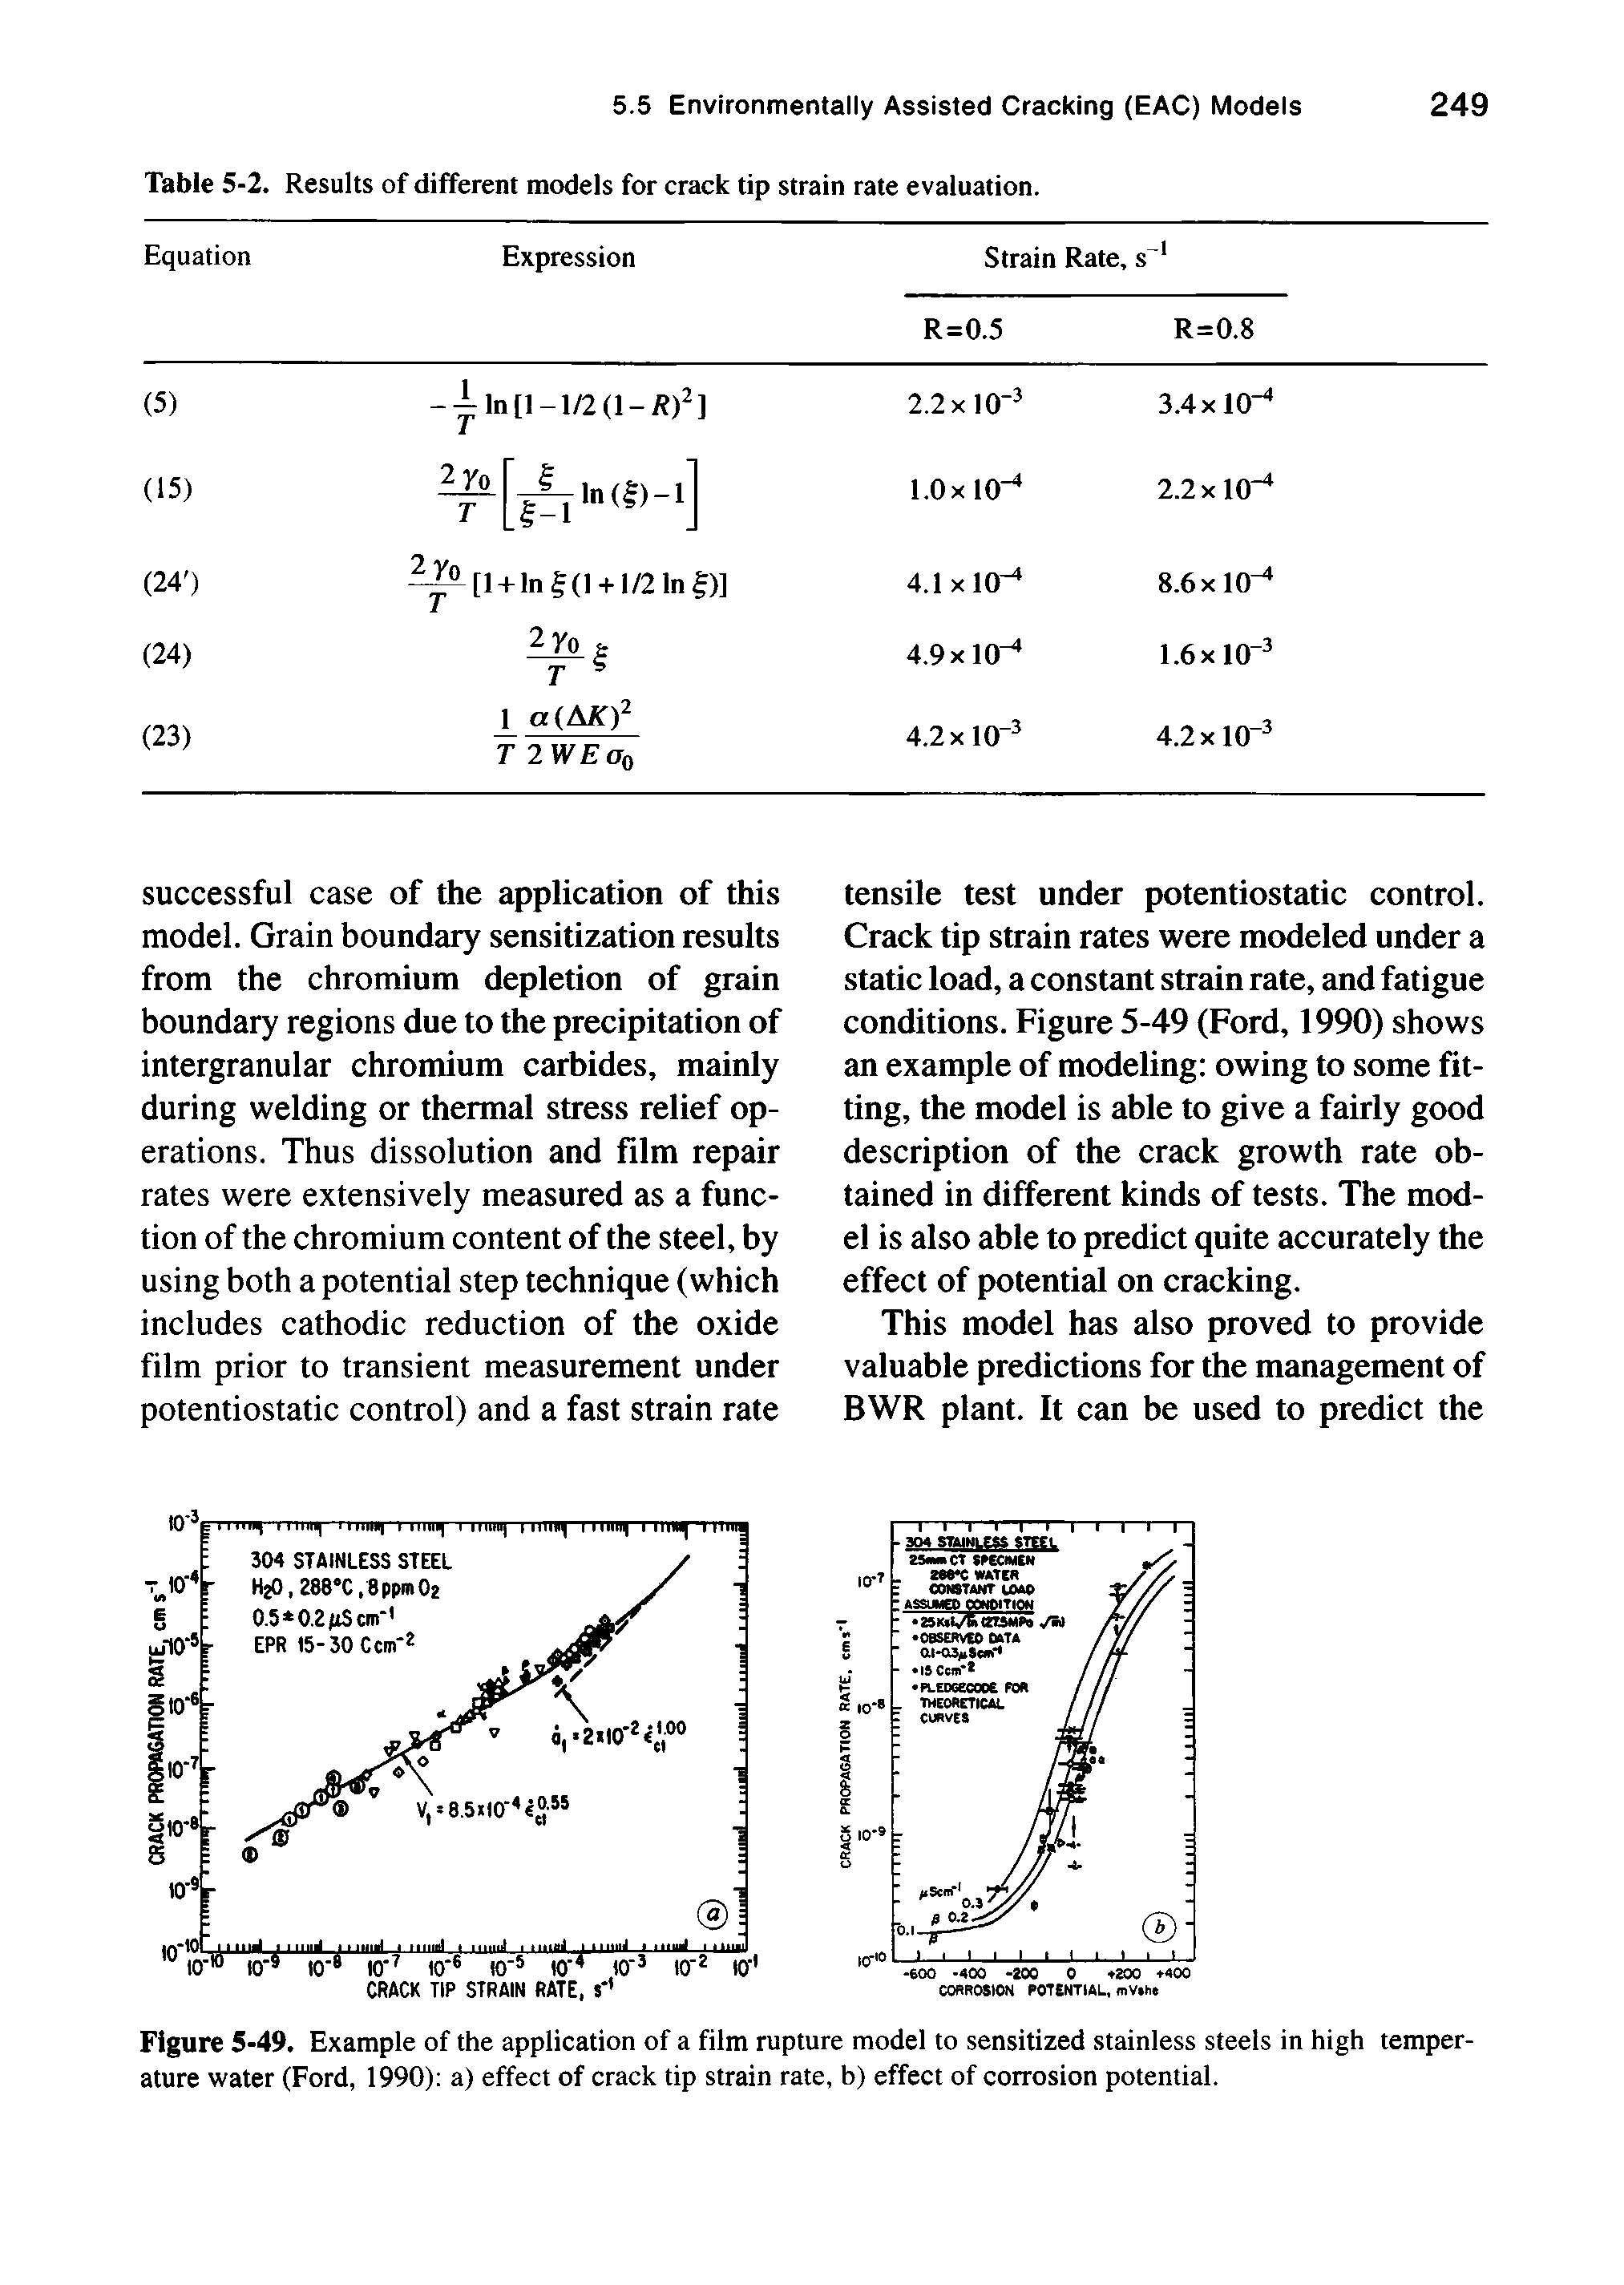 Figure 5-49. Example of the application of a film rupture model to sensitized stainless steels in high temperature water (Ford, 1990) a) effect of crack tip strain rate, b) effect of corrosion potential.